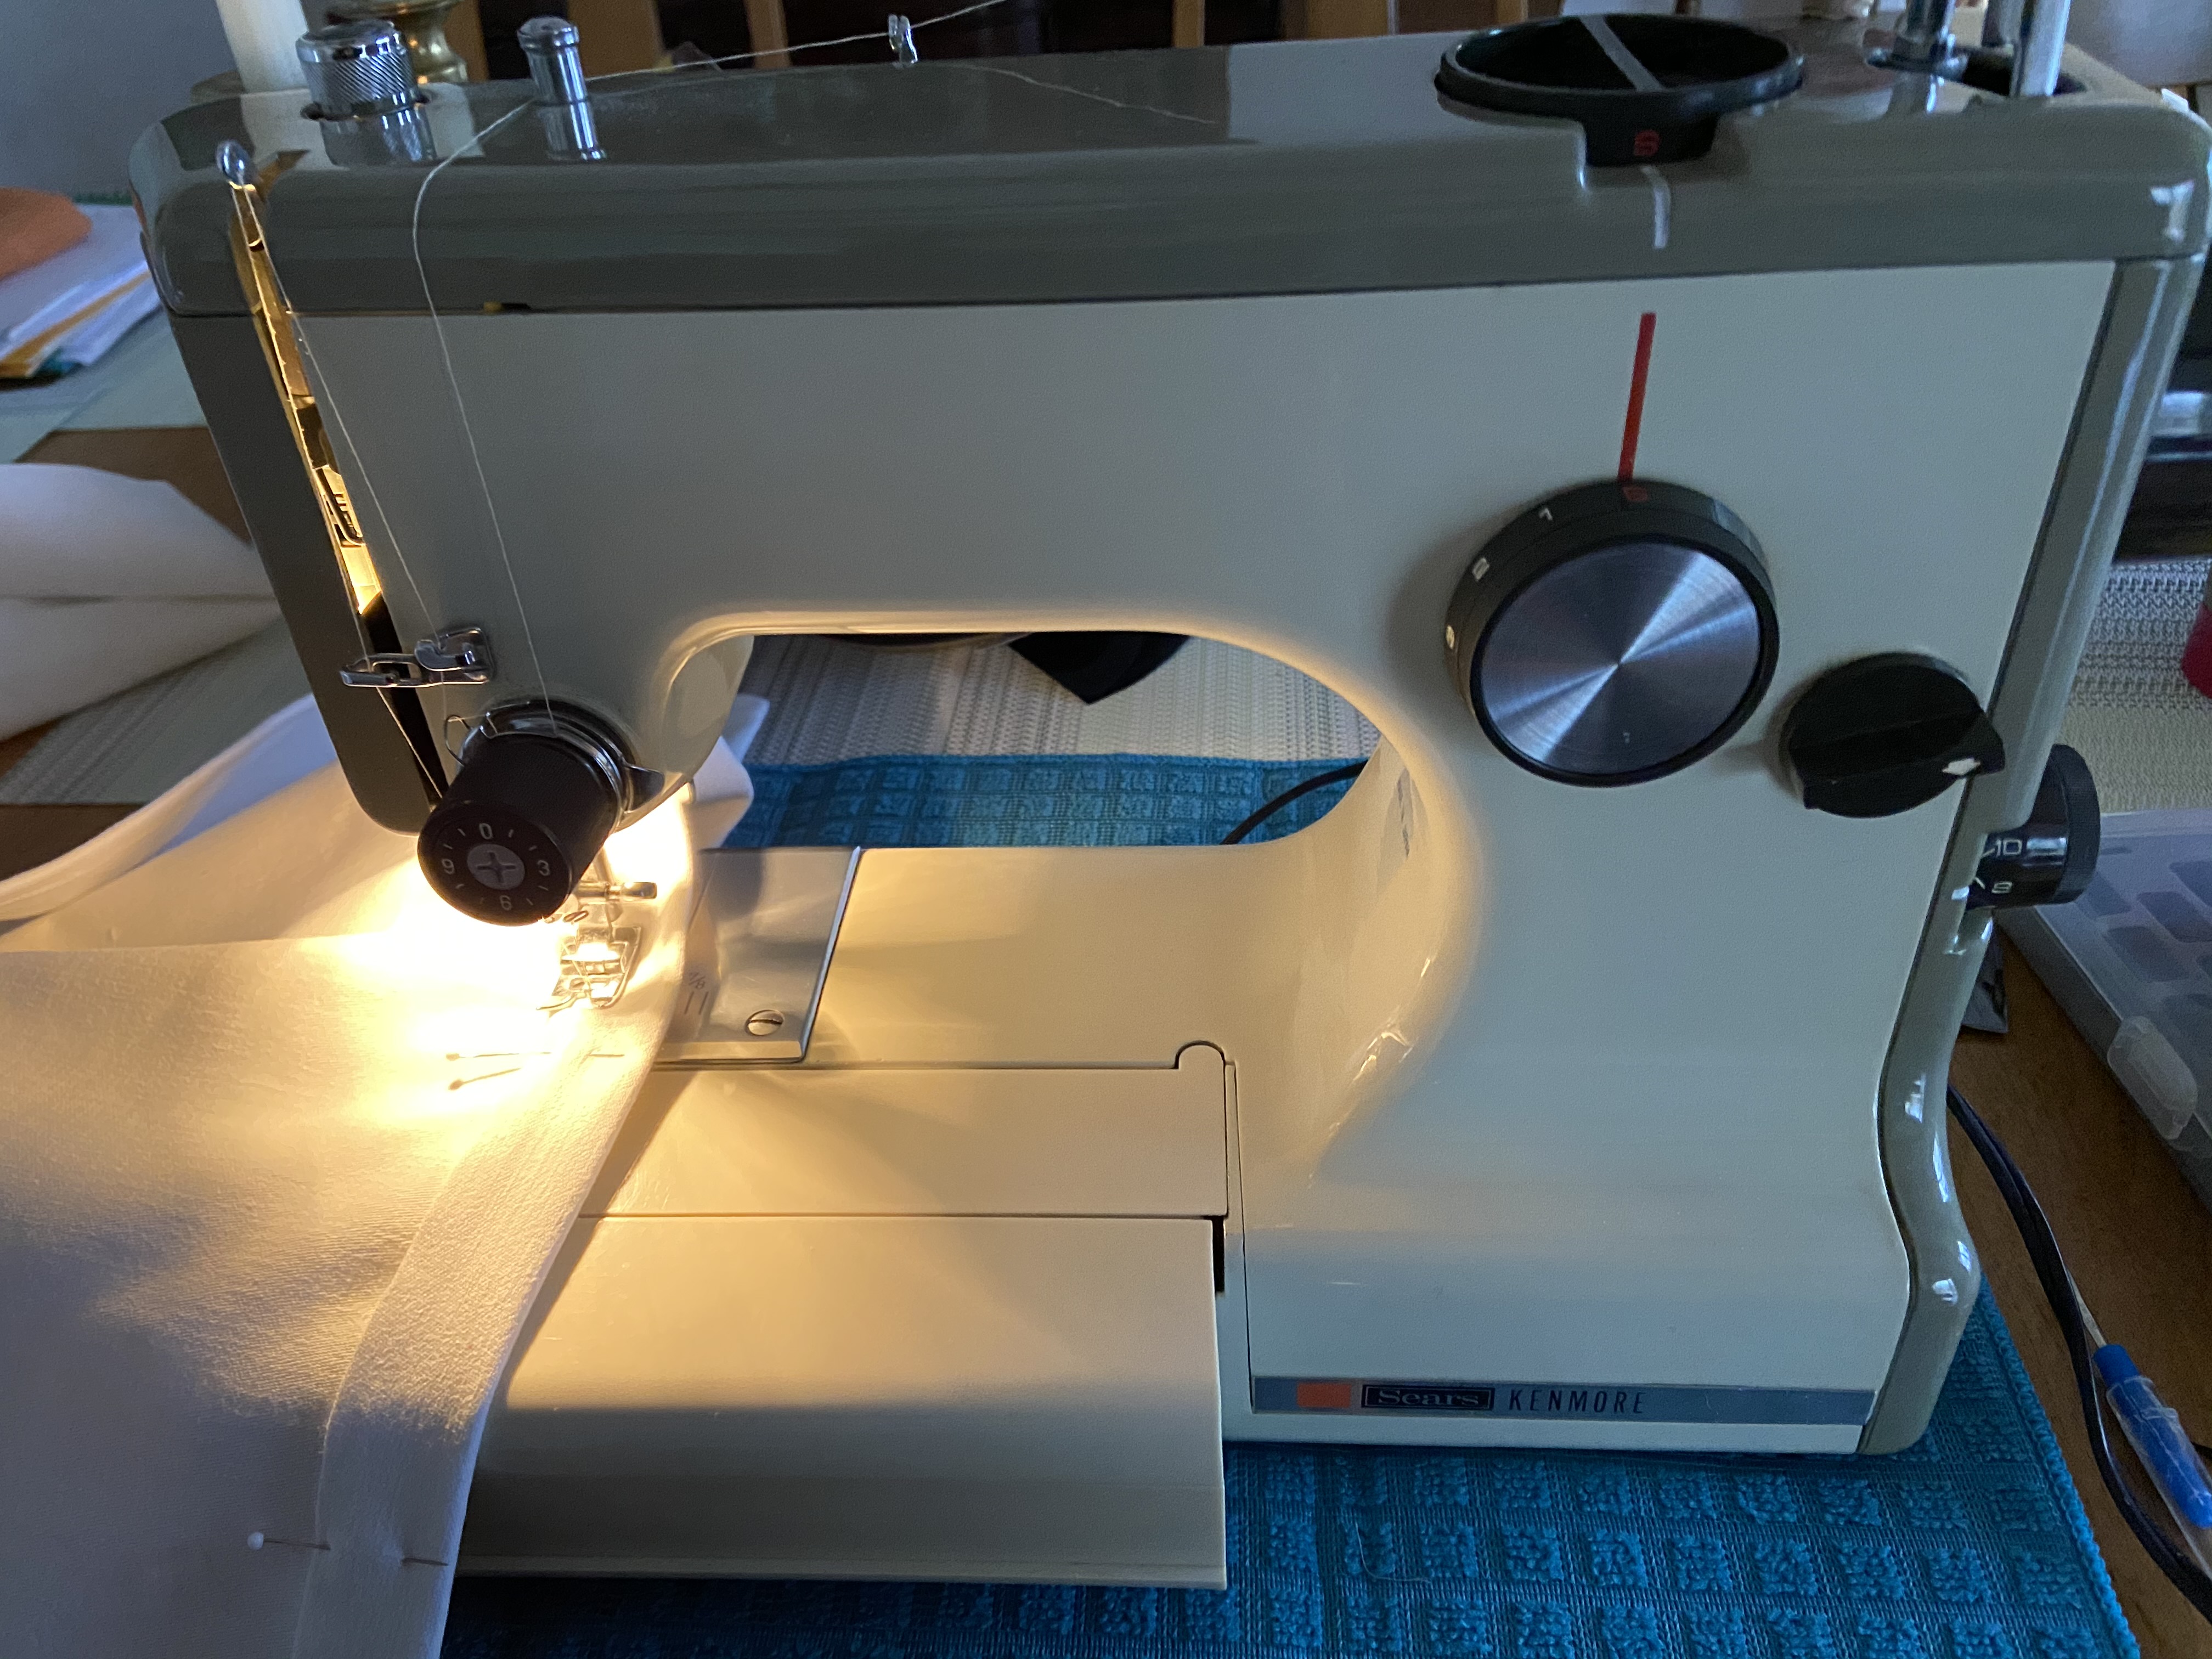 1060's Kenmore 1040 sewing machine